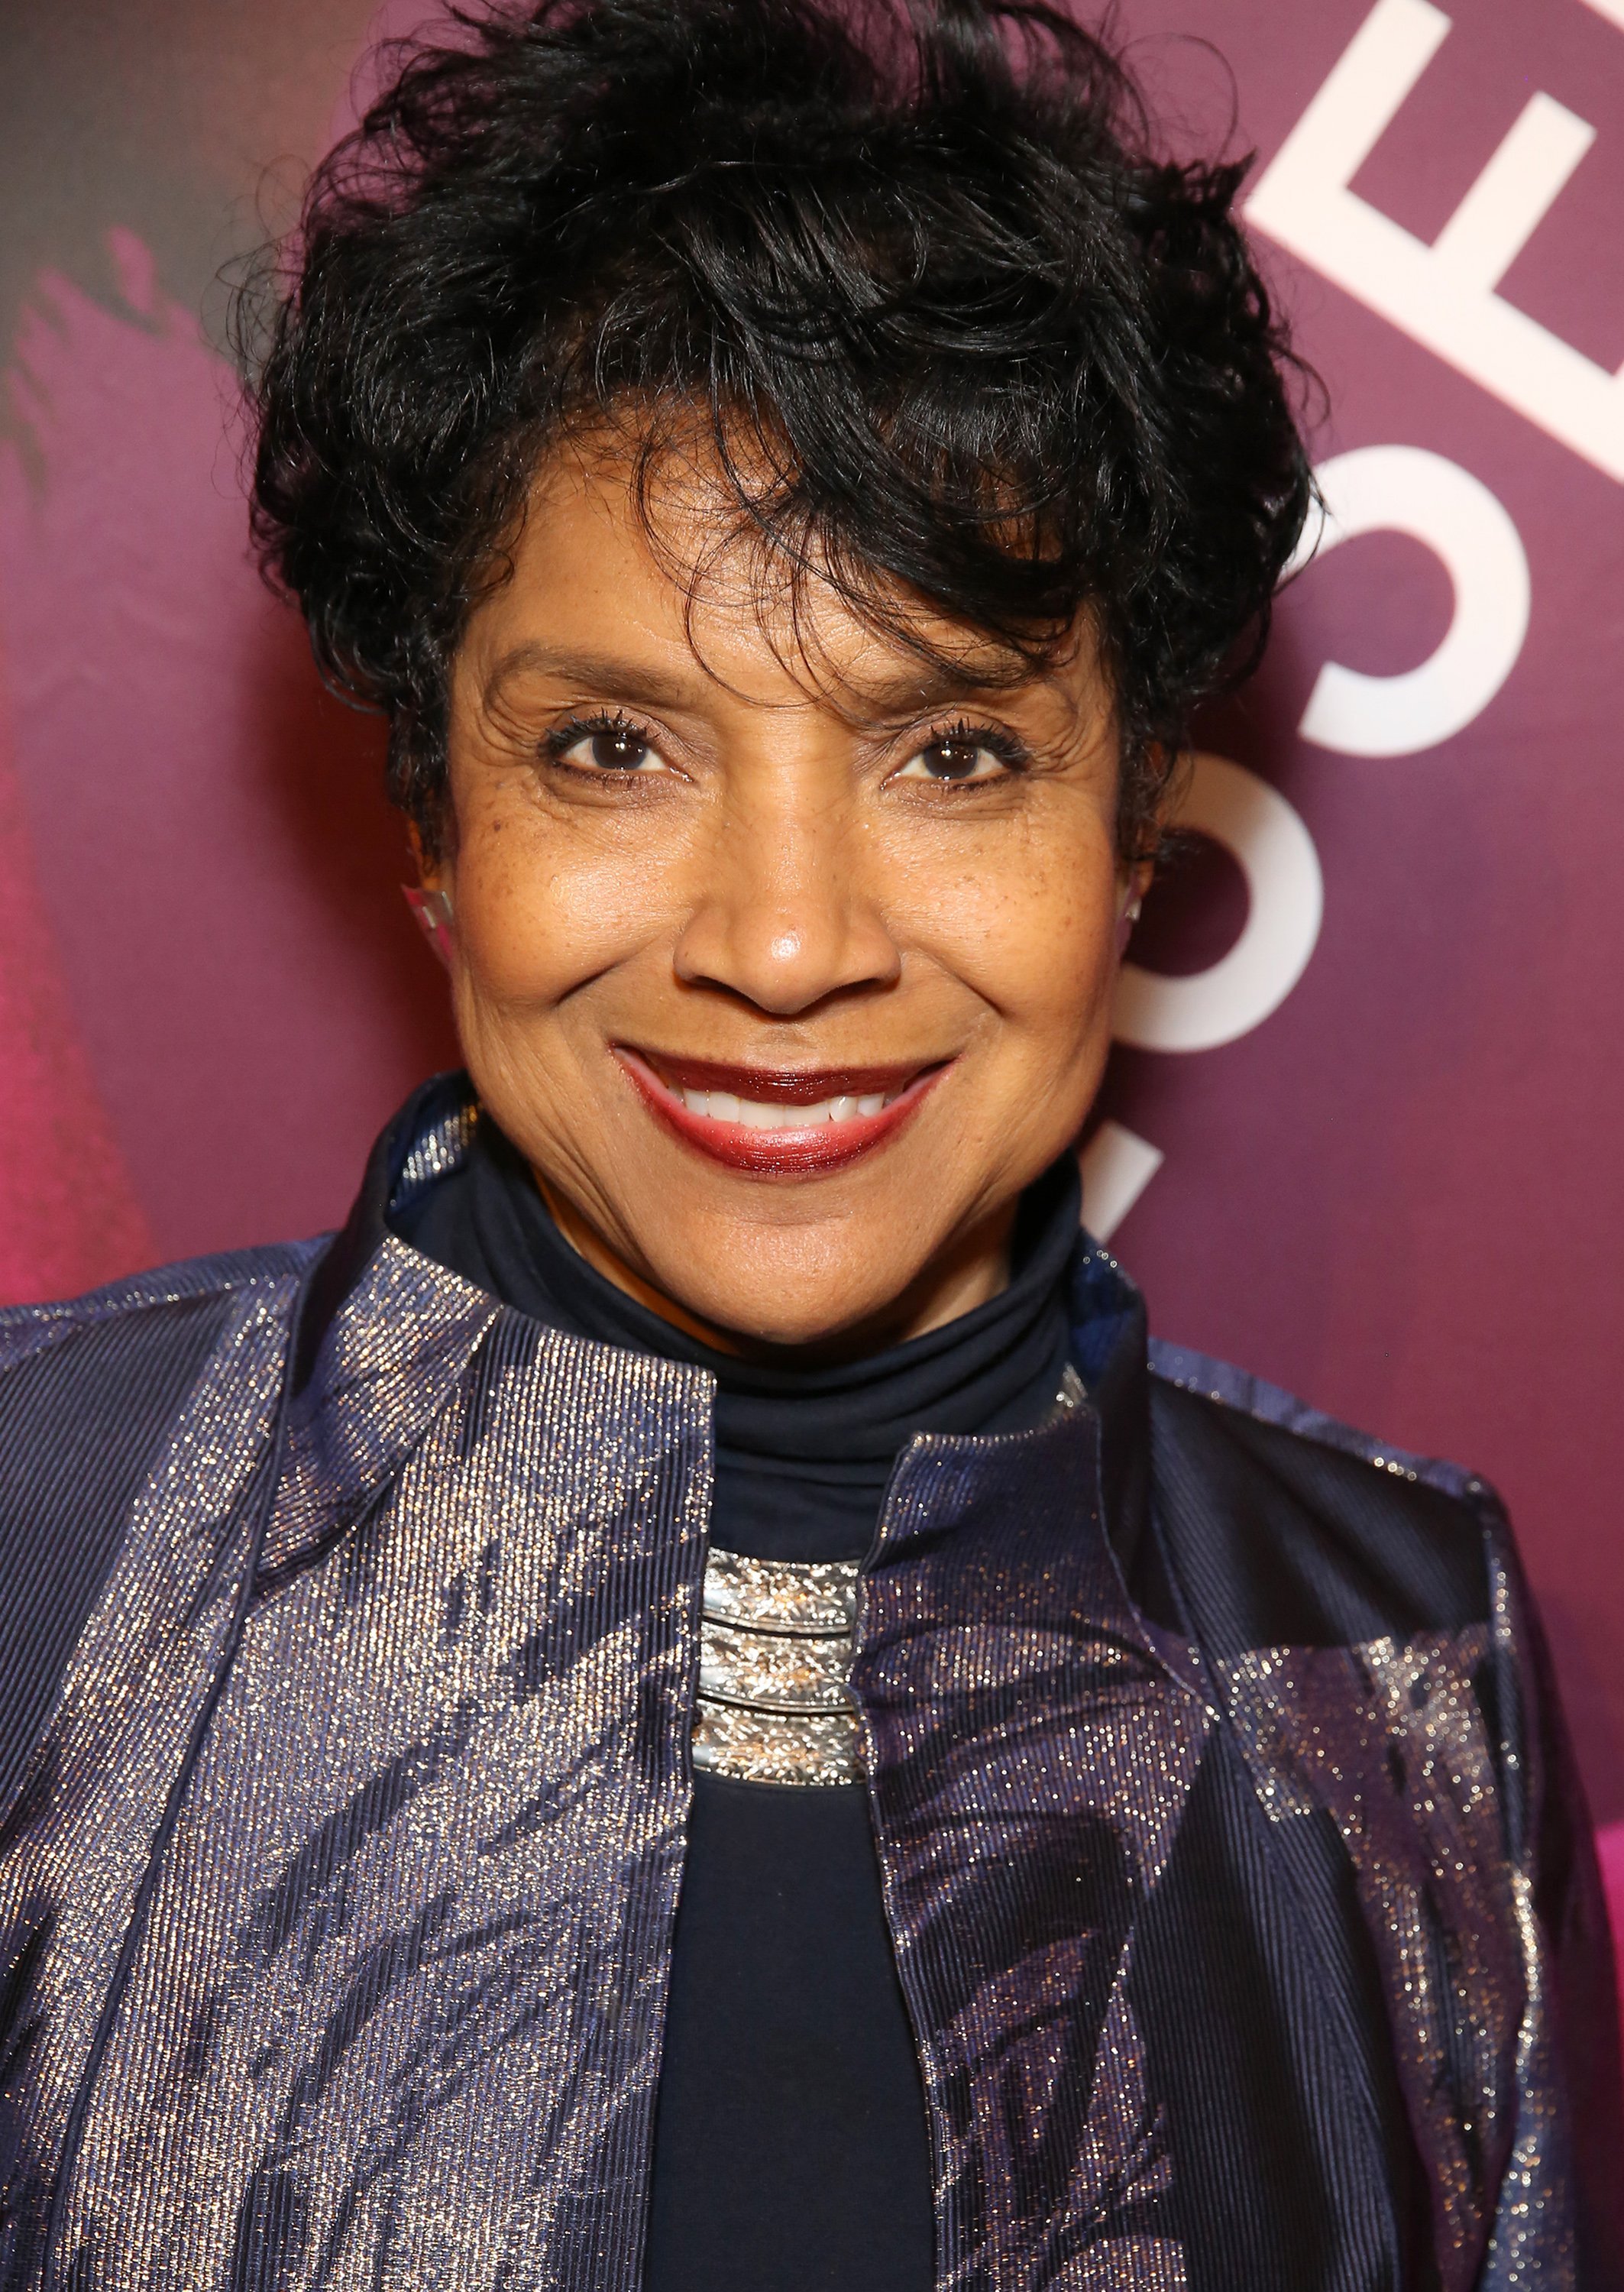 Phylicia Rashad attends the Broadway opening night performance for "Children of a Lesser God" at Studio 54 Theatre on April 11, 2018 | Photo: GettyImages